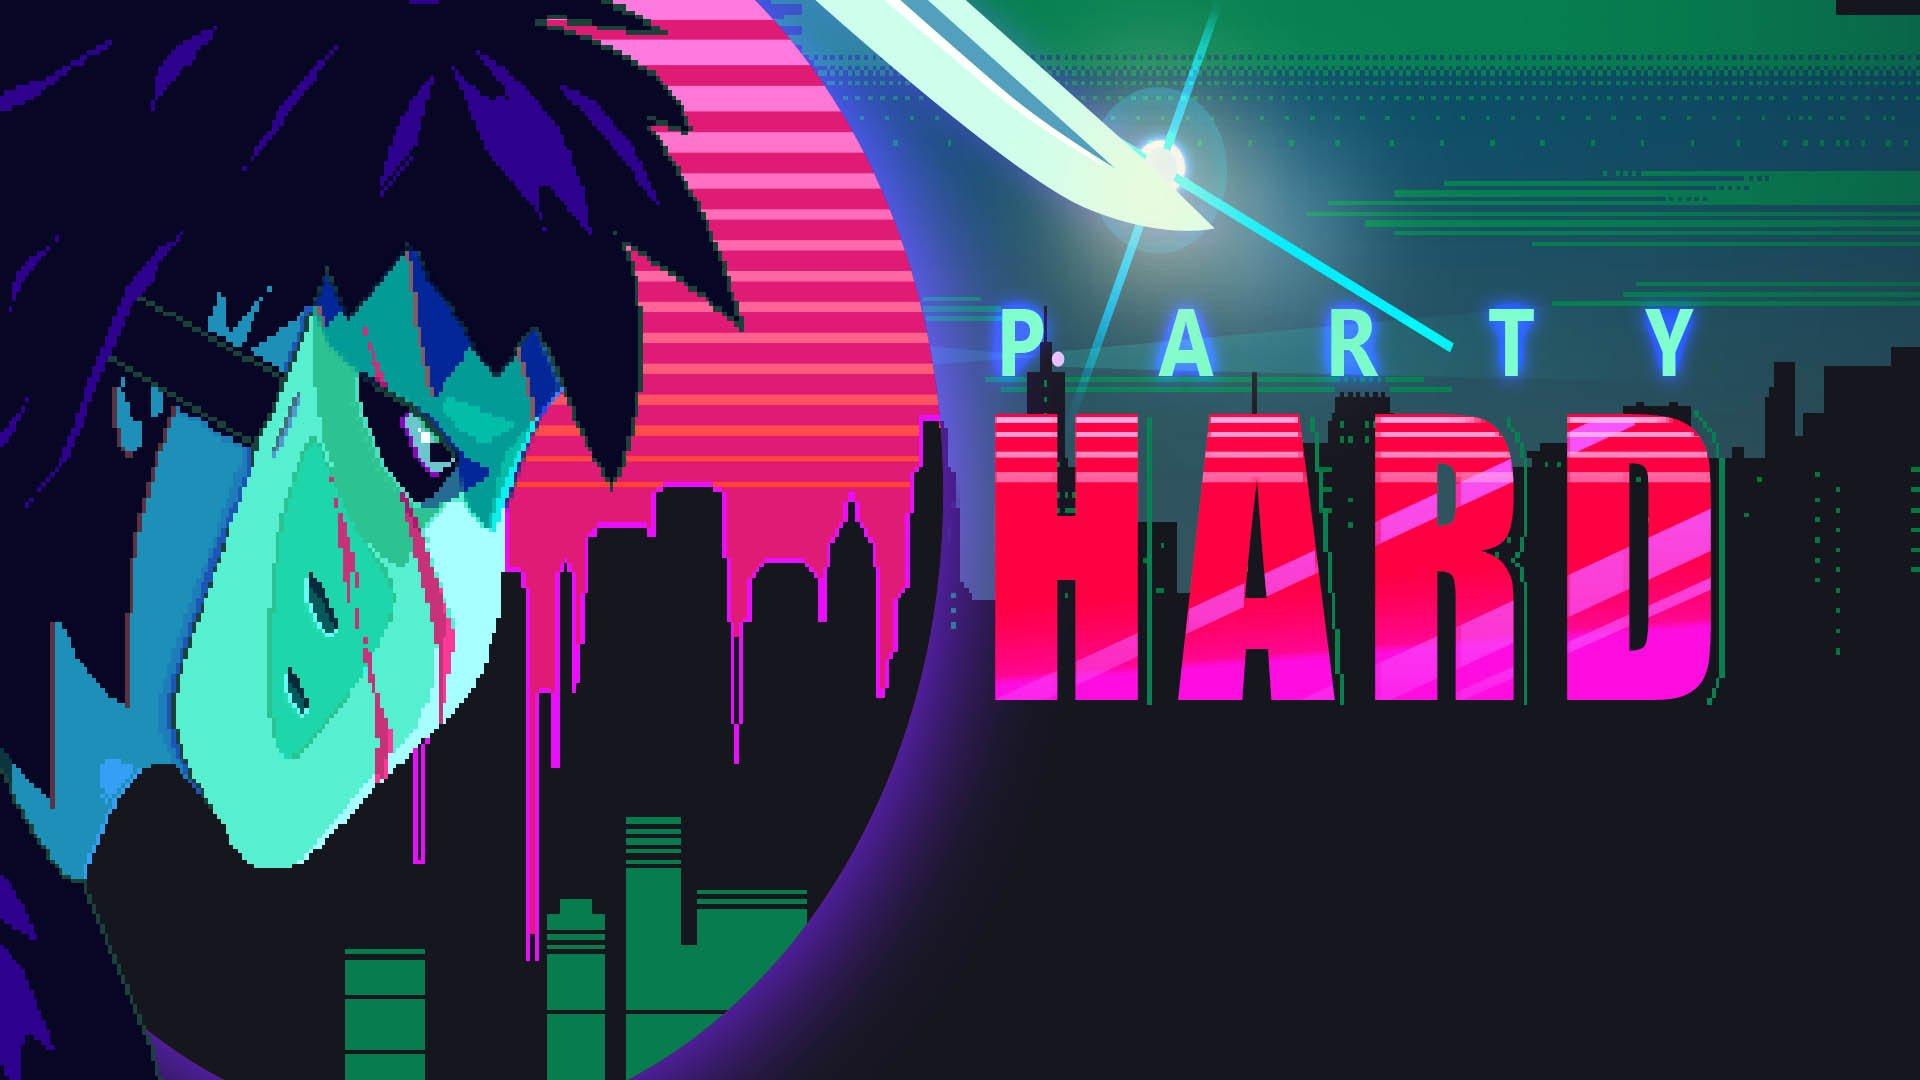 Party Hard - the video game about stopping parties. Press-kit.